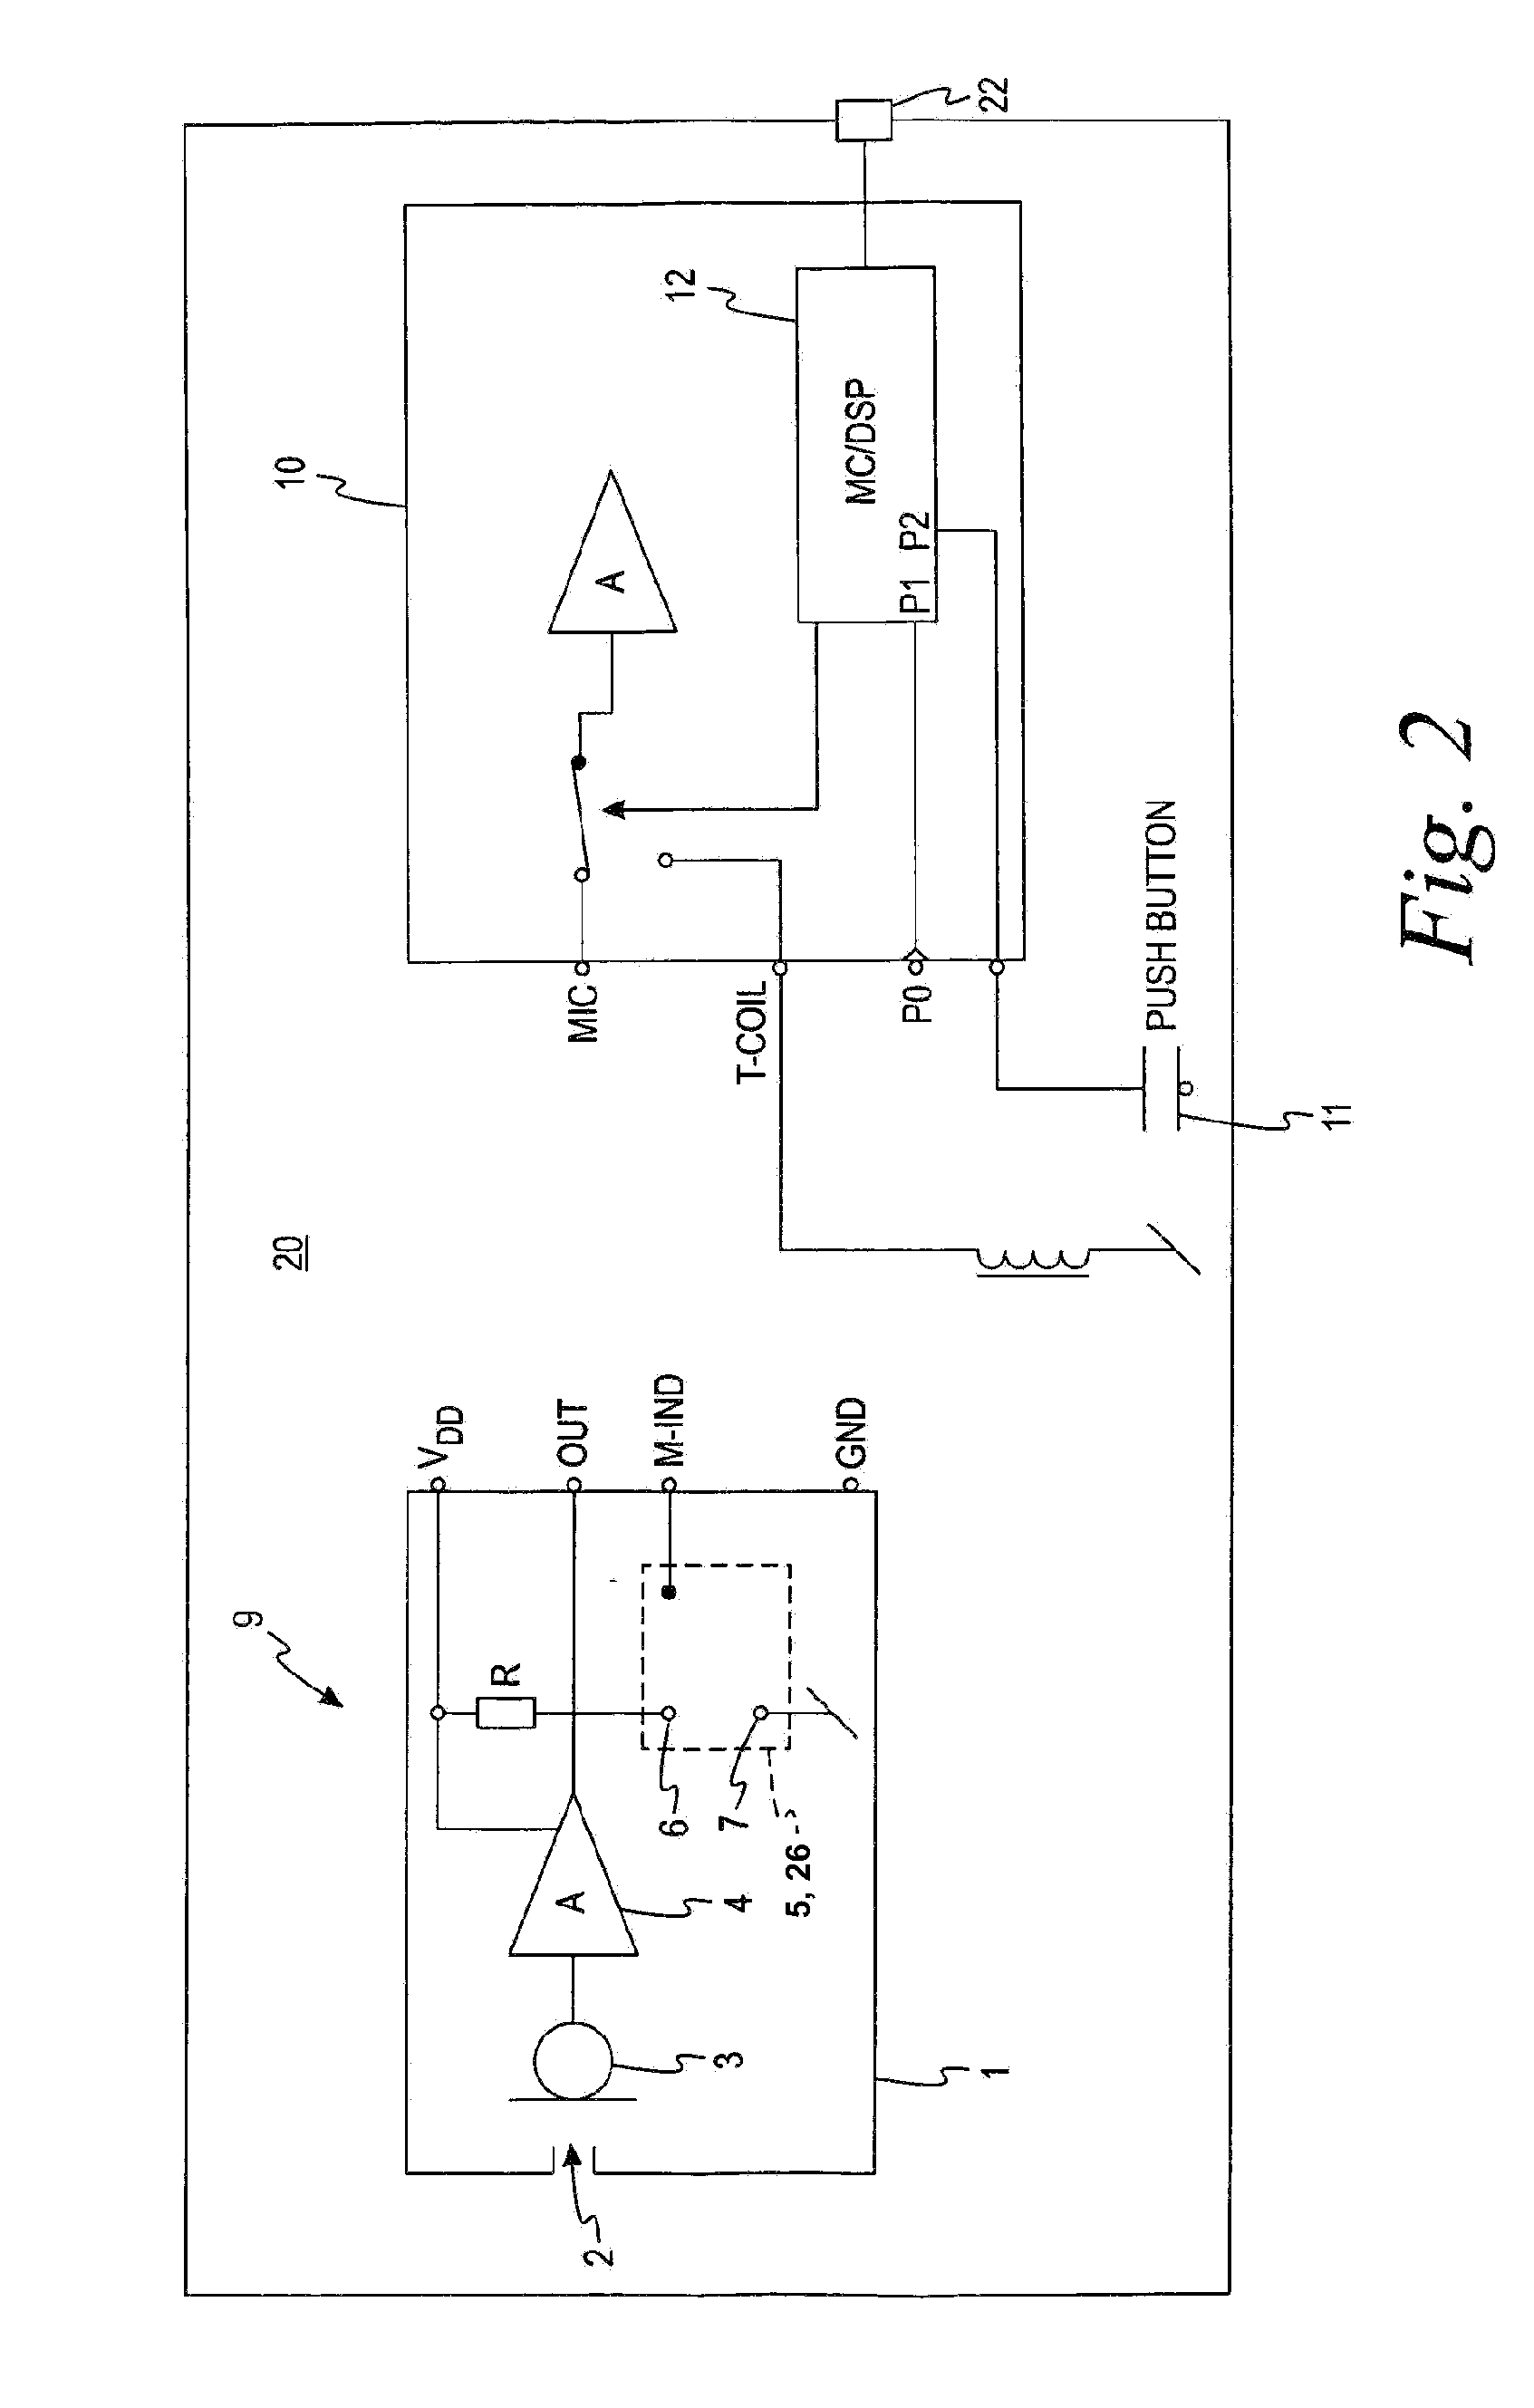 Microphone assembly comprising magnetically activatable element for signal switching and field indication